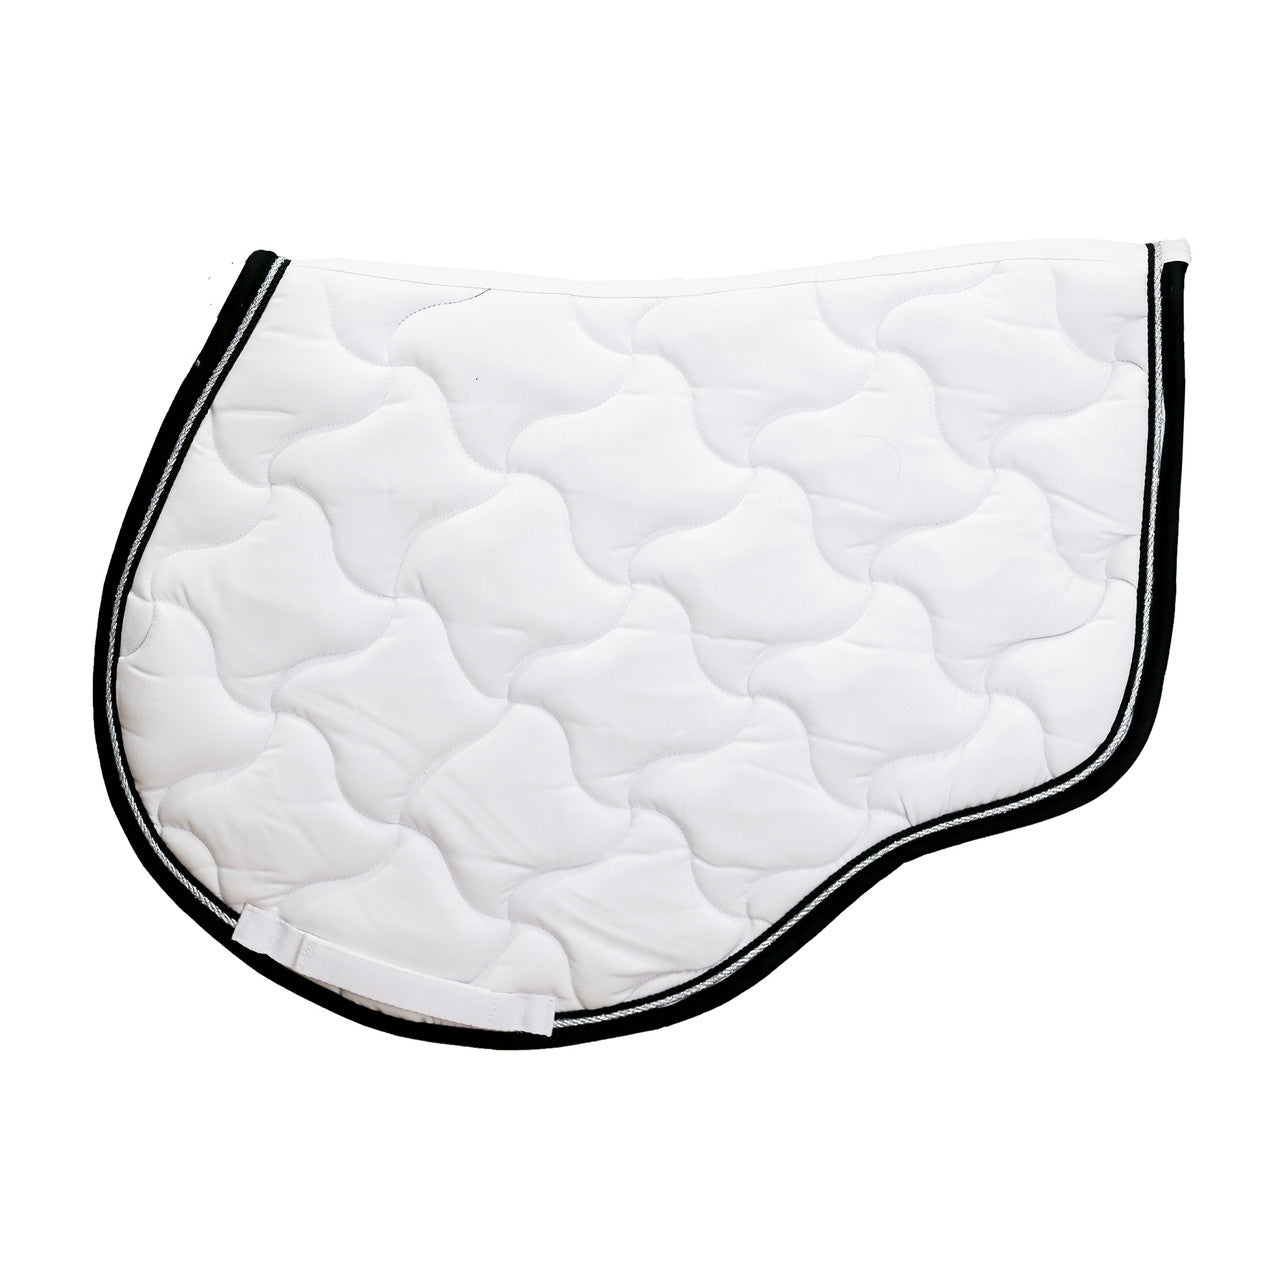 Competition White AP Saddle Pad - Black Binding - LOW STOCK...LAST FEW LEFT!